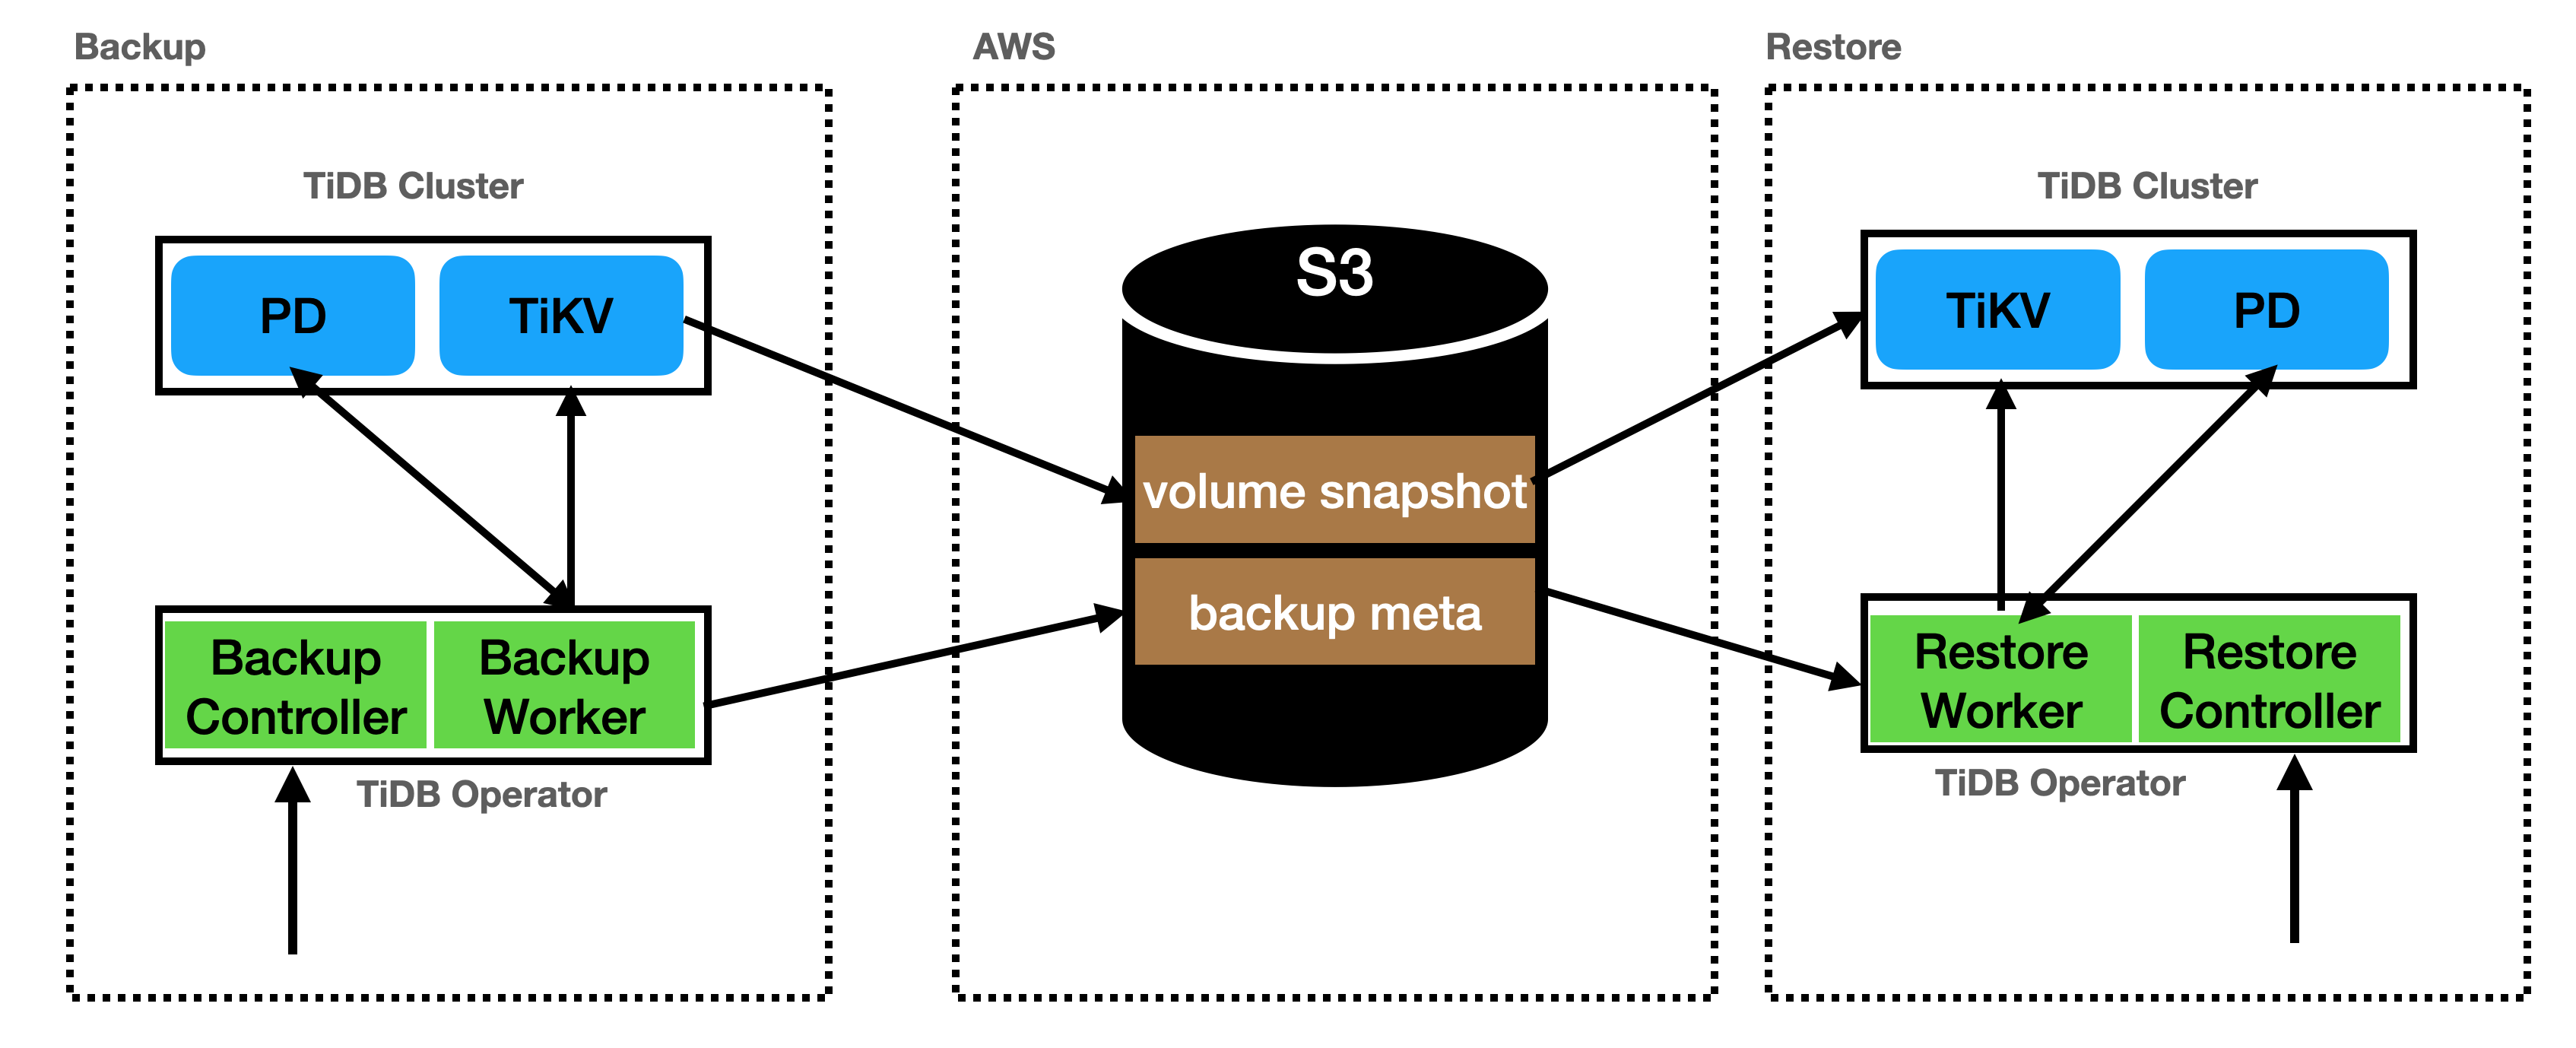 AWS EBS Snapshot Backup and Restore architecture